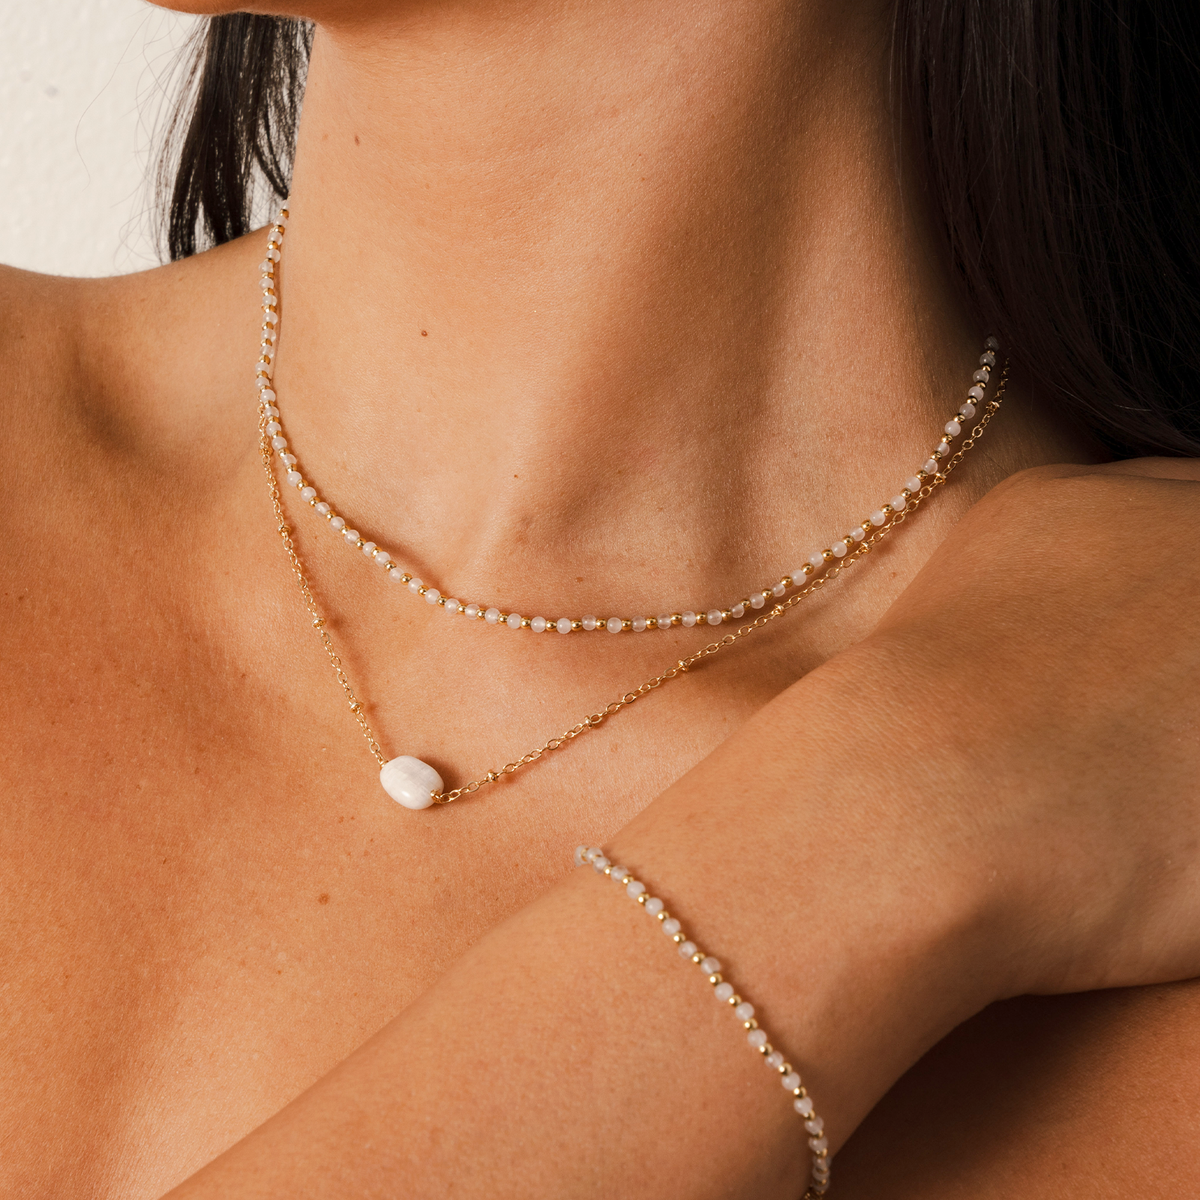 Model wearing a necklace stack. The stack consists of a 2mm moonstone and gold bead healing necklace and a moonstone healing necklace with a gold chain. She is also wearing a 2mm moonstone and gold bead healing bracelet